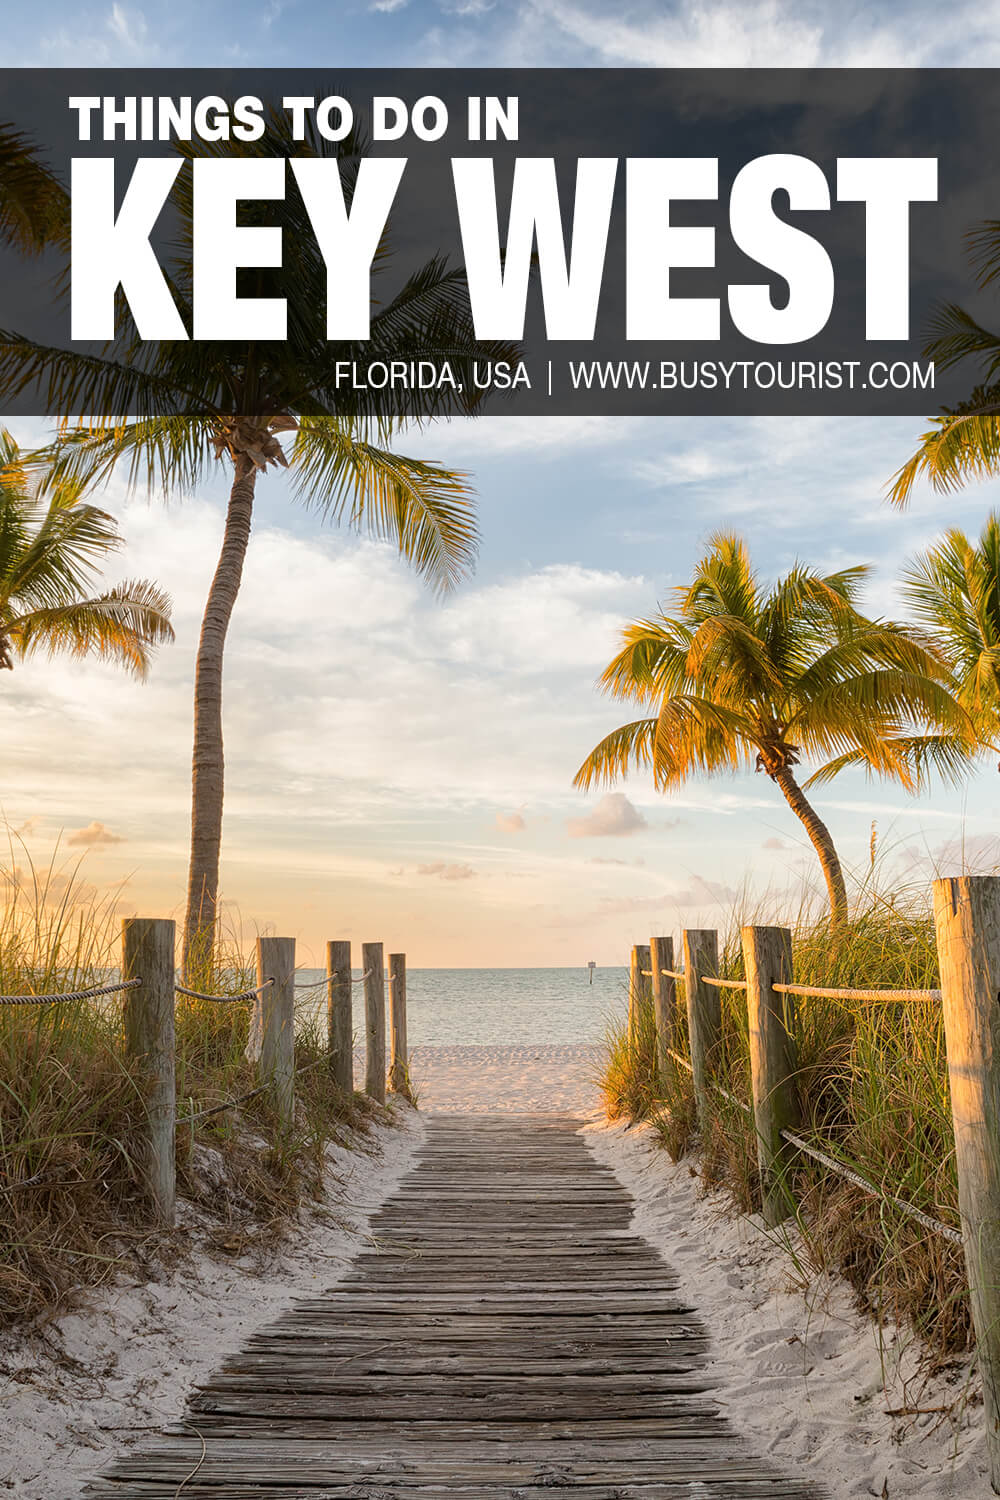 29 Best & Fun Things To Do In Key West (Florida) Attractions & Activities